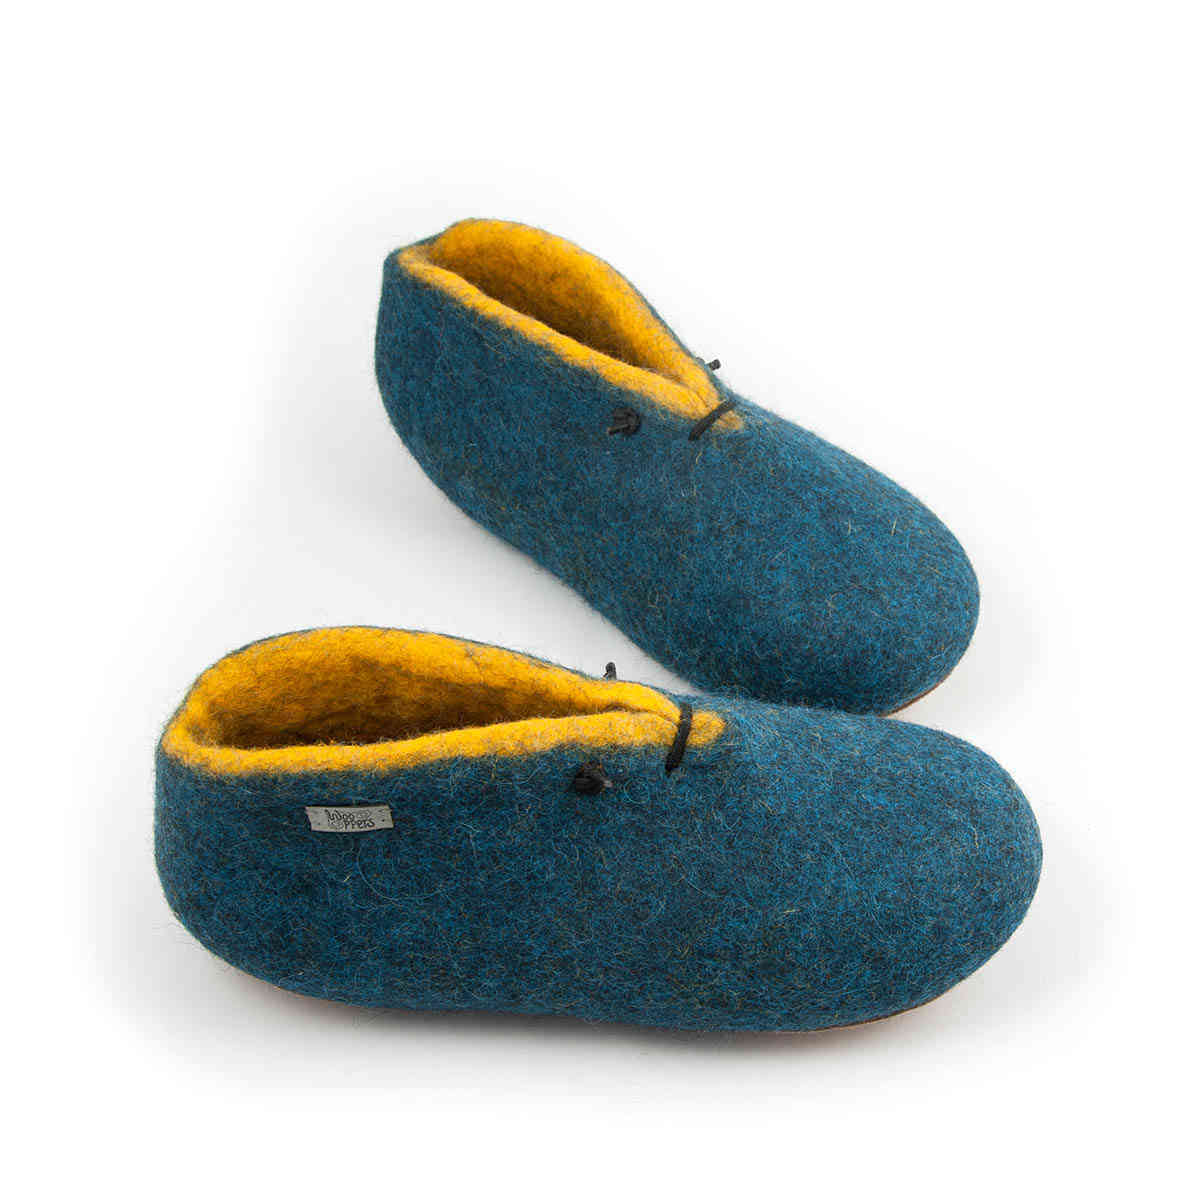 Slipper boots petrol blue with yellow 57717